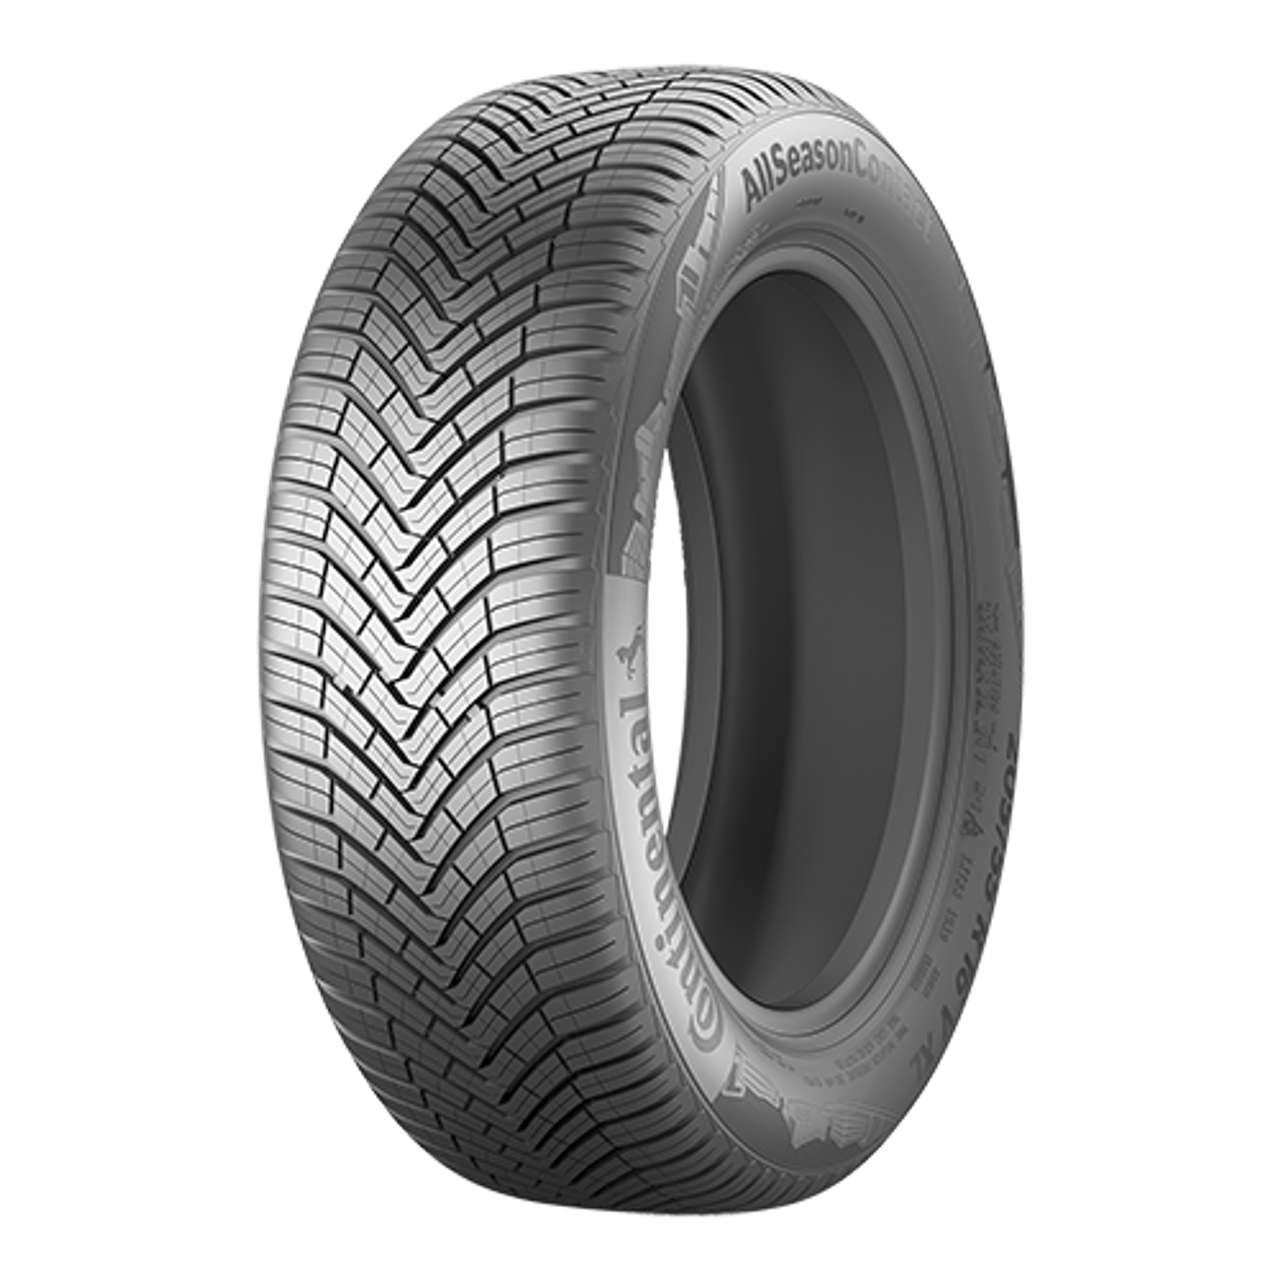 CONTINENTAL ALLSEASONCONTACT (EVc) 215/65R16 102V CRM (CONTIRE.TEX) BSW